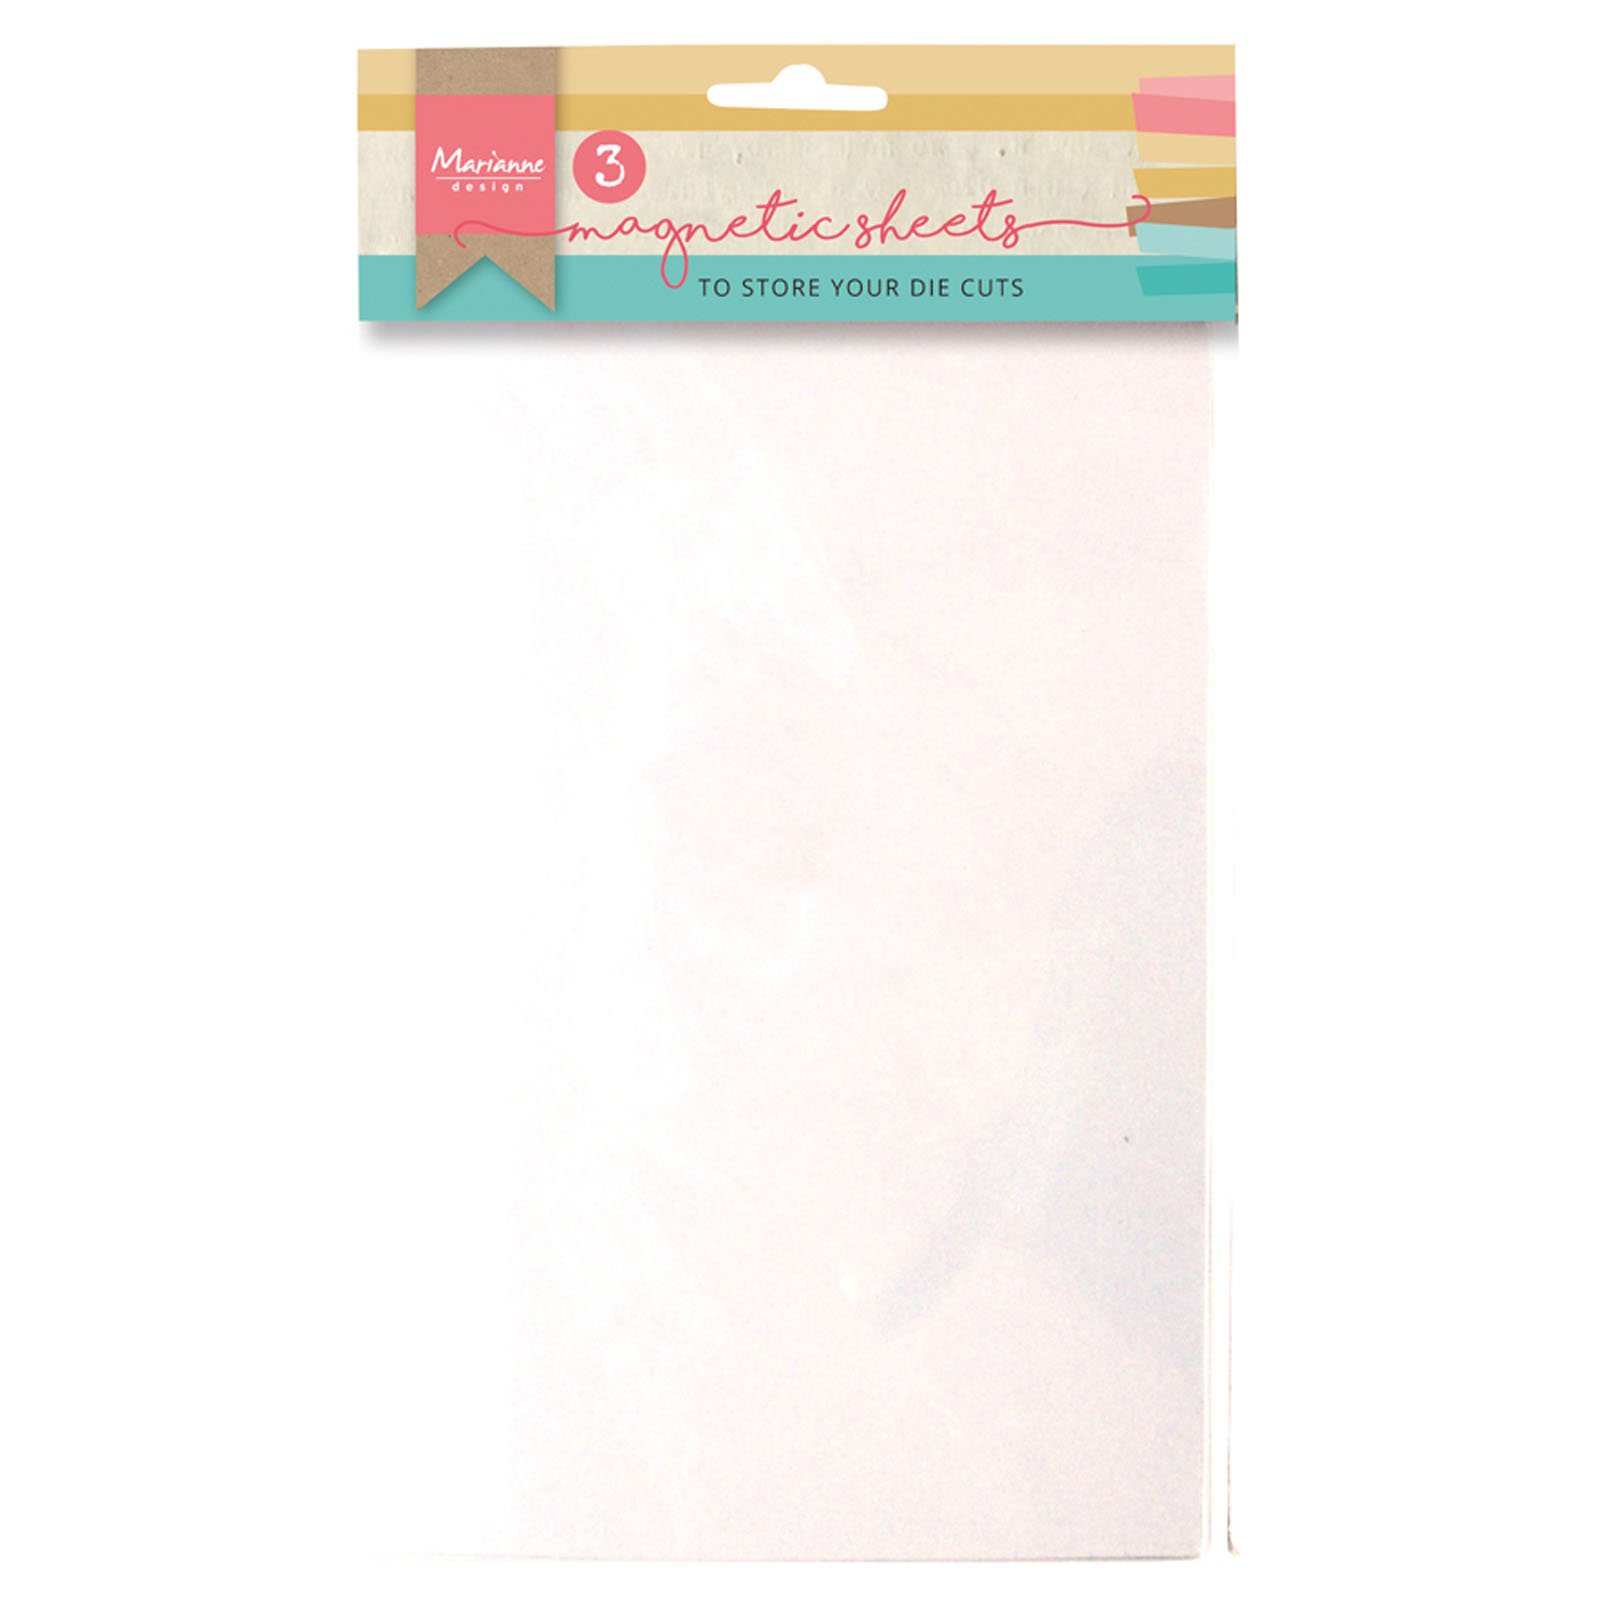 Sizzix Storage - Printed Julep Magnetic Sheets